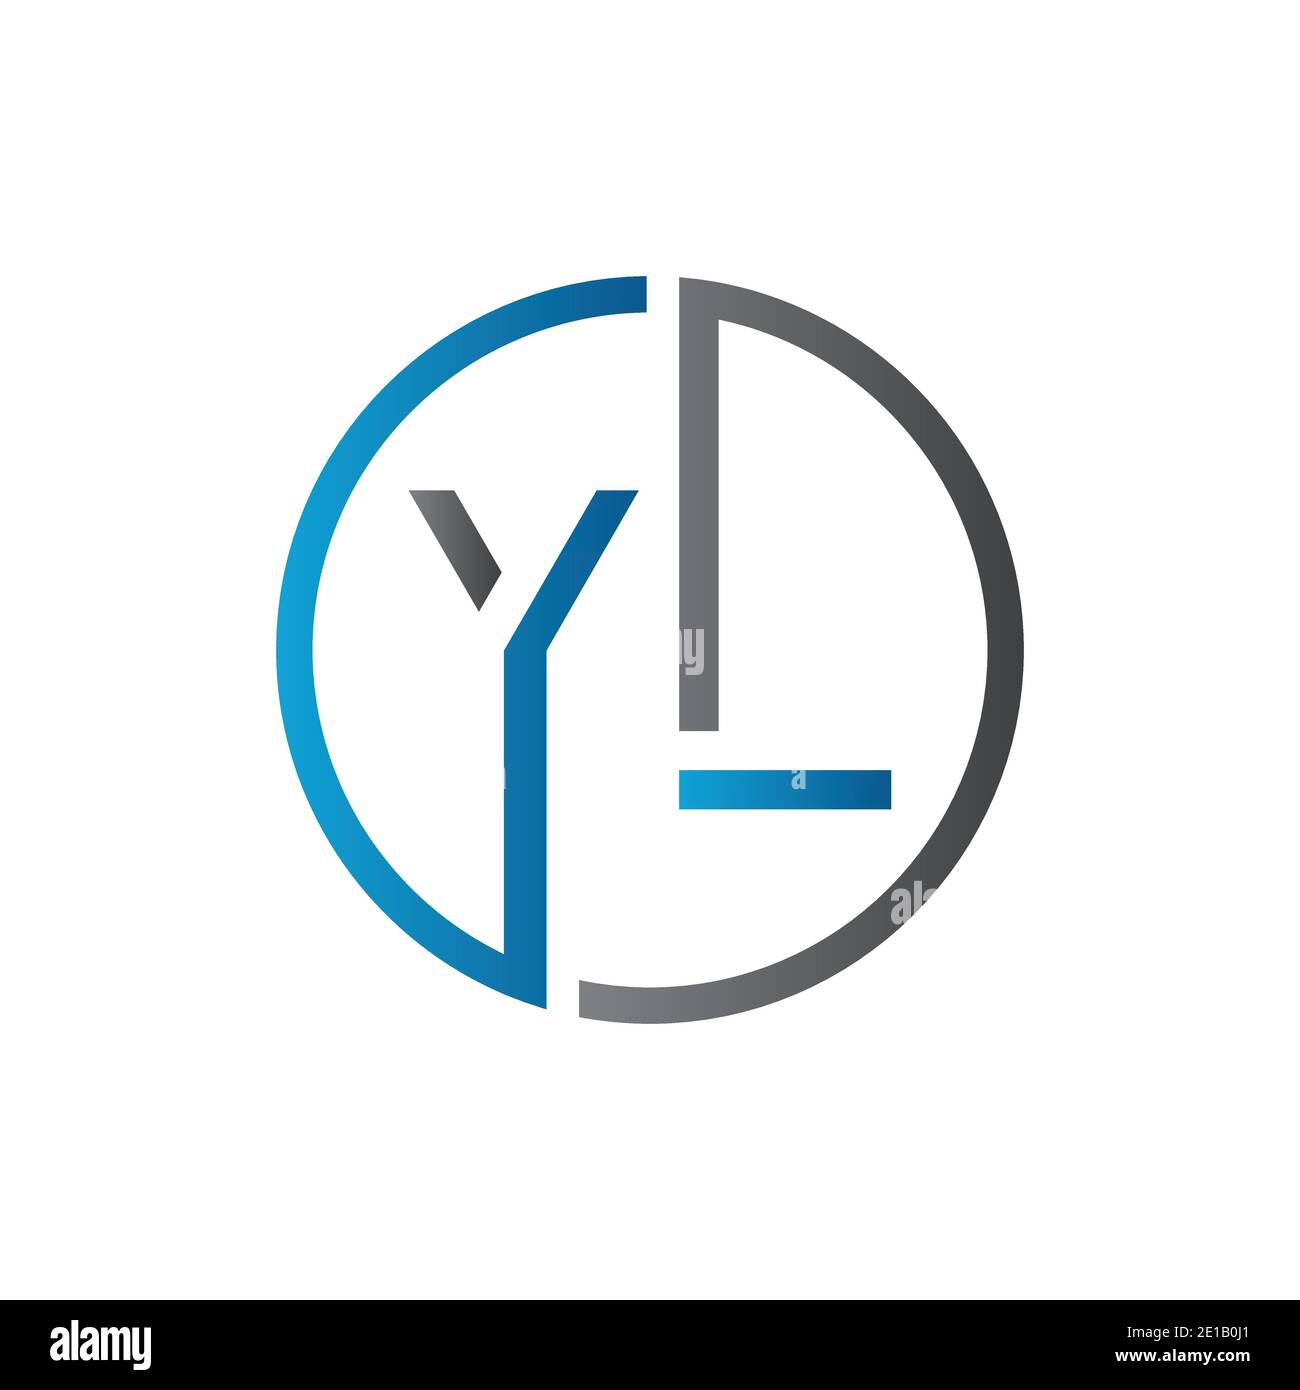 Logo yl Cut Out Stock Images & Pictures - Alamy